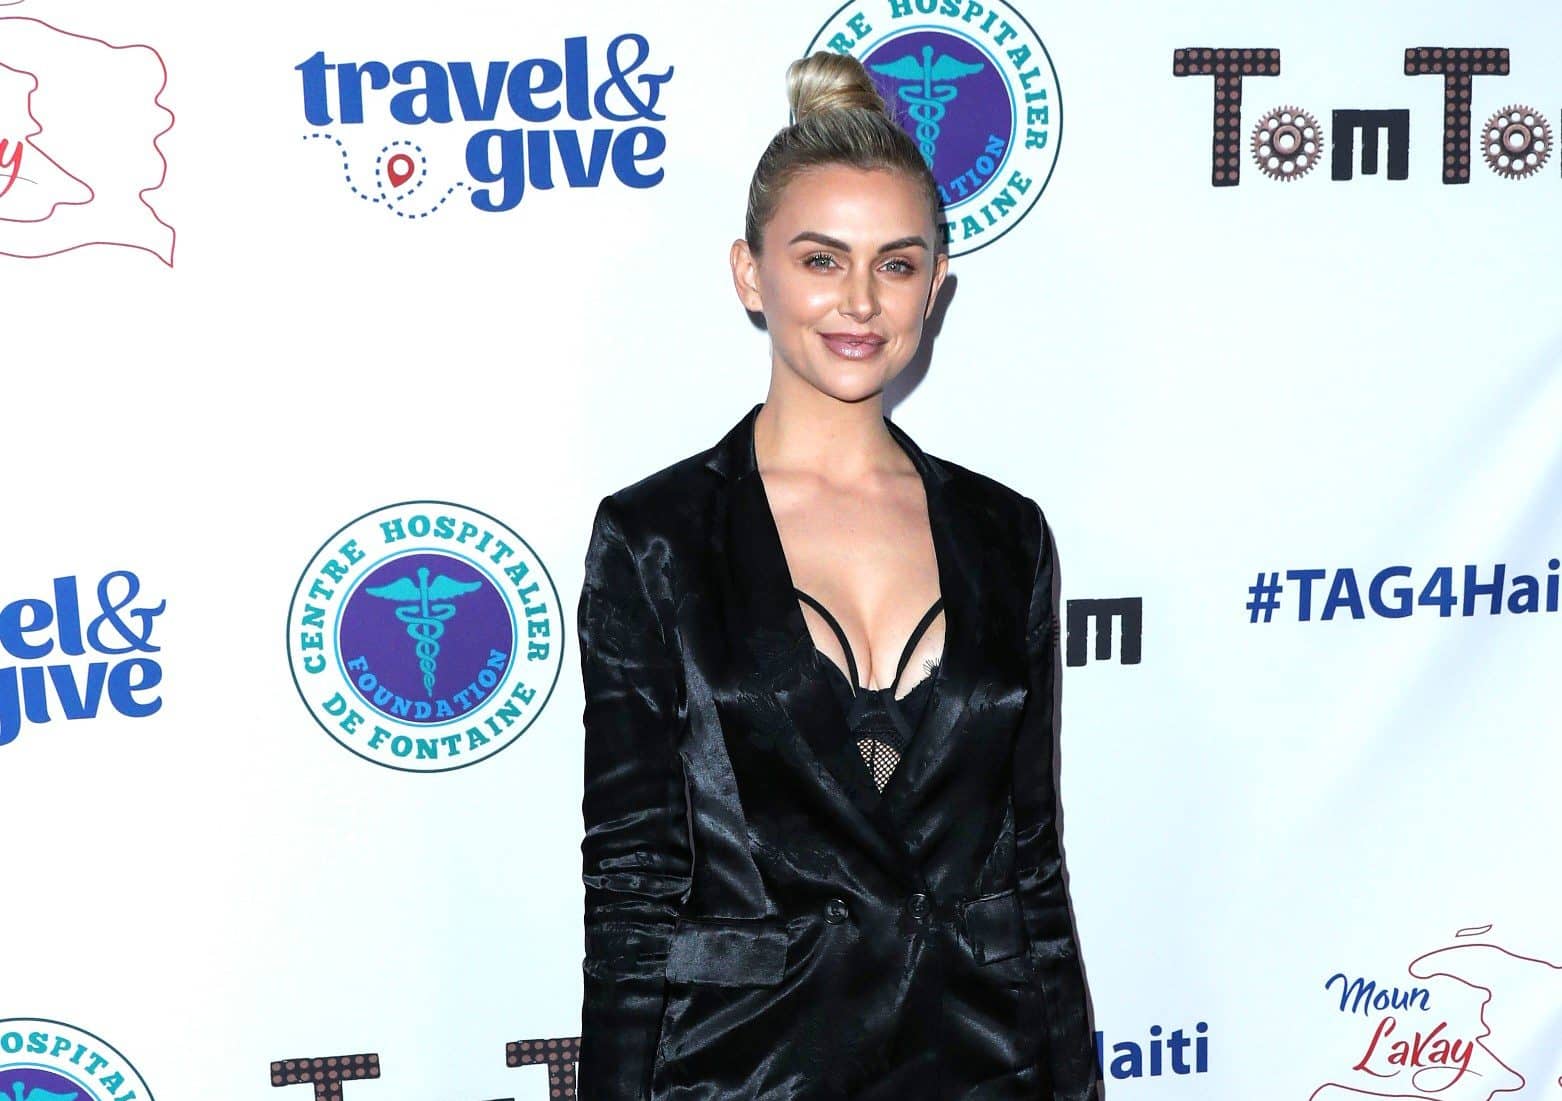 Lala Kent on Signing on for Pump Rules Season 10 the "Night Before" Filming, Katie Being "Lighter" Post-Split, and "Cordial" Relationship With Jax, Plus Brittany vs Stassi